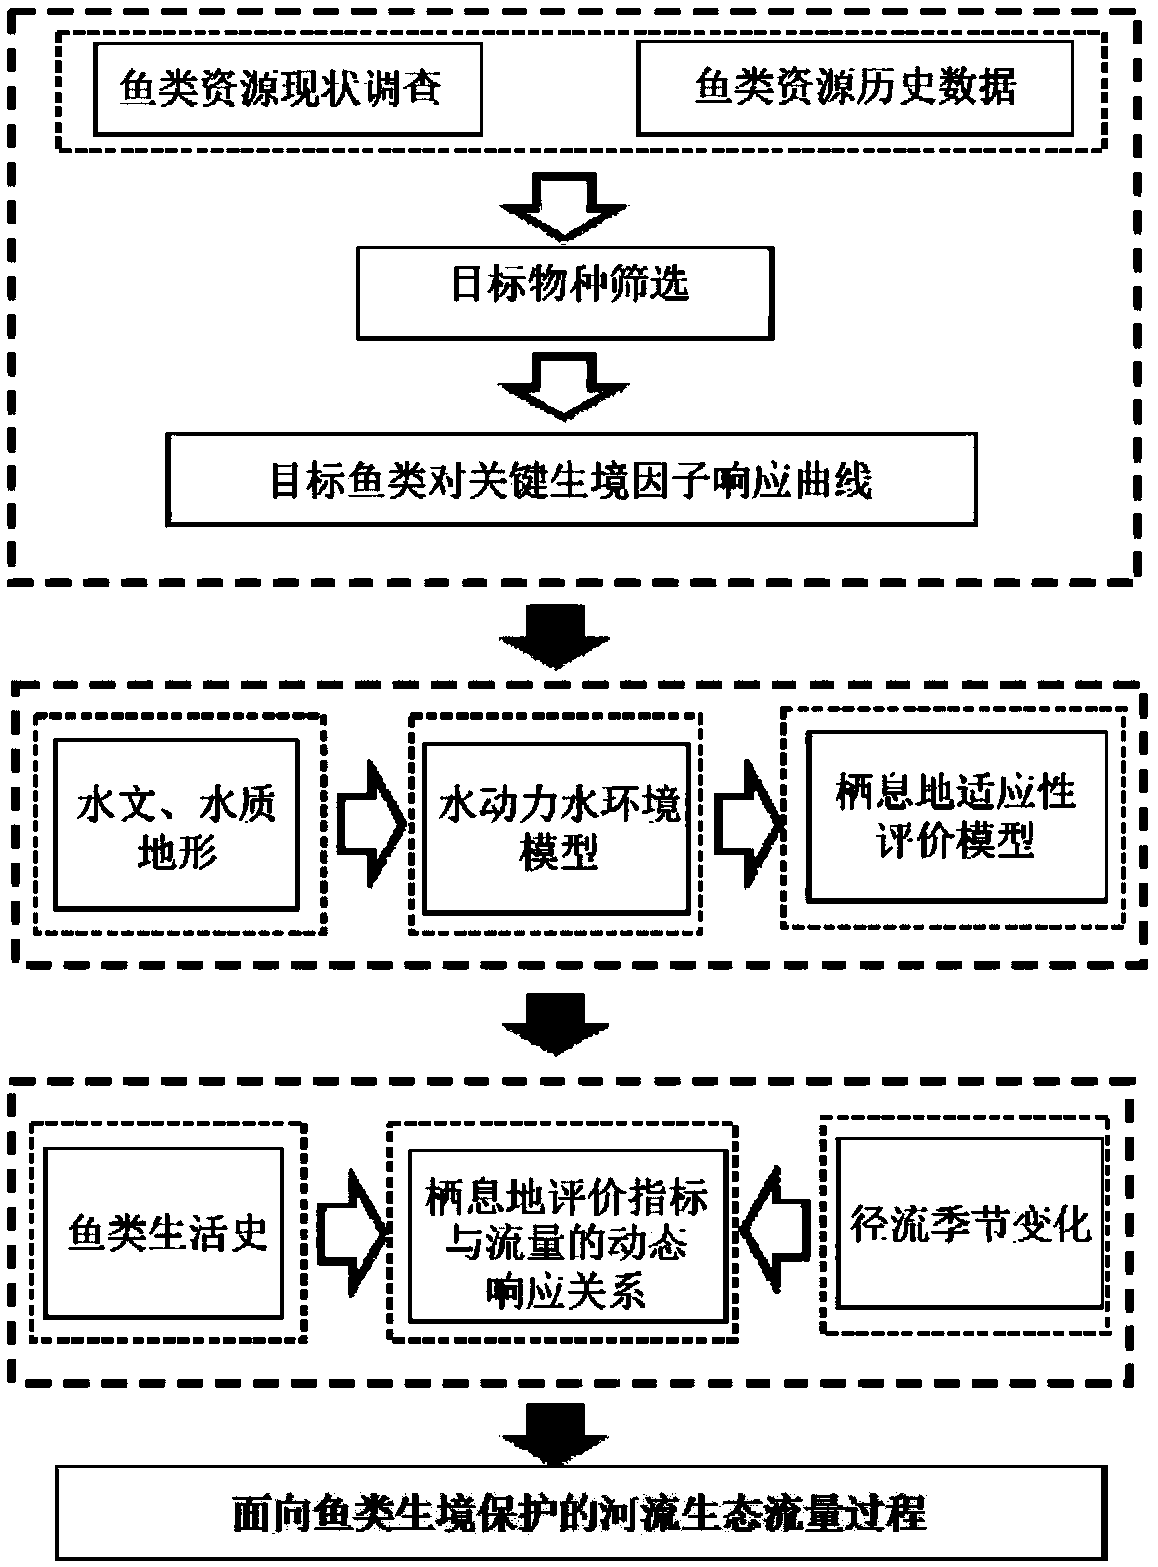 River ecological flow process derivation method for fish habitat protection